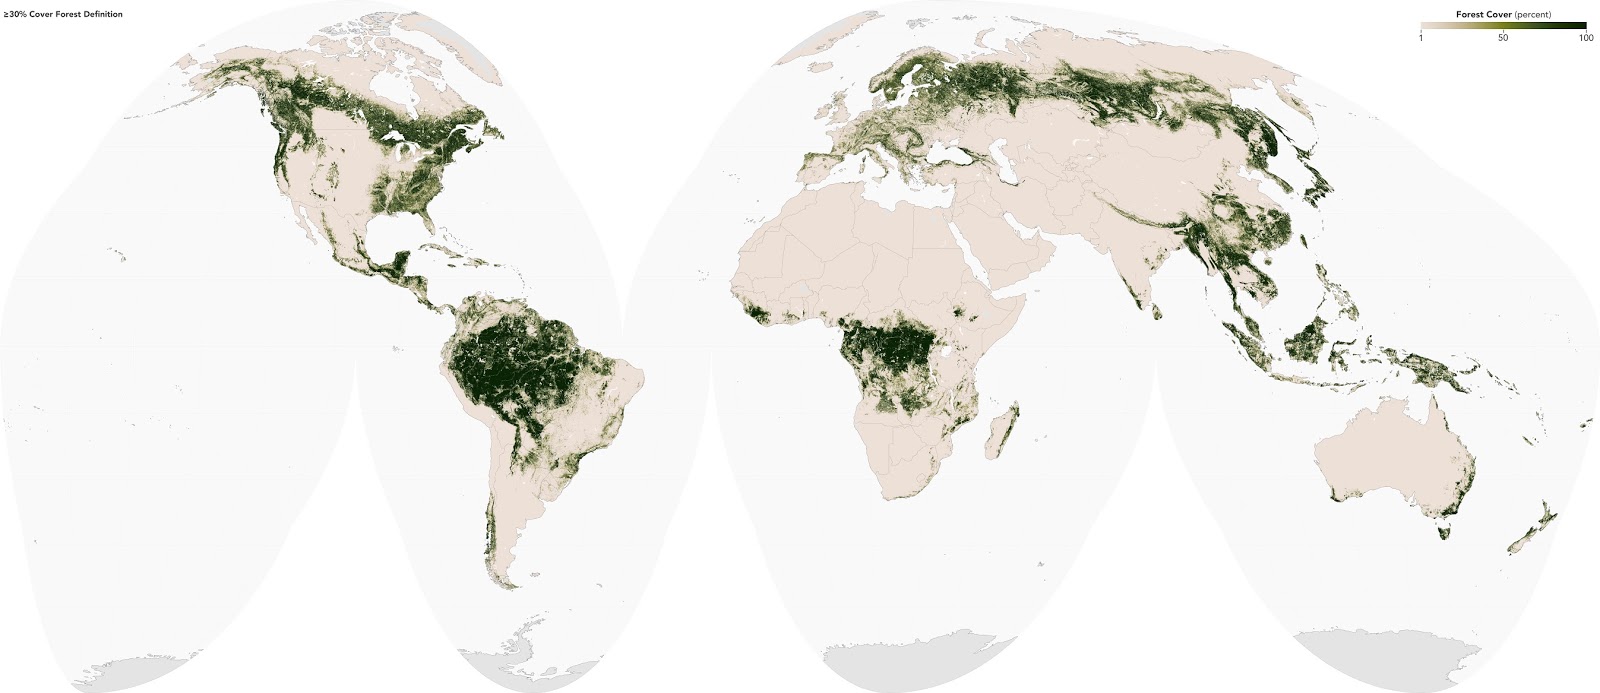 Areas of the World with over 30% Forest Cover